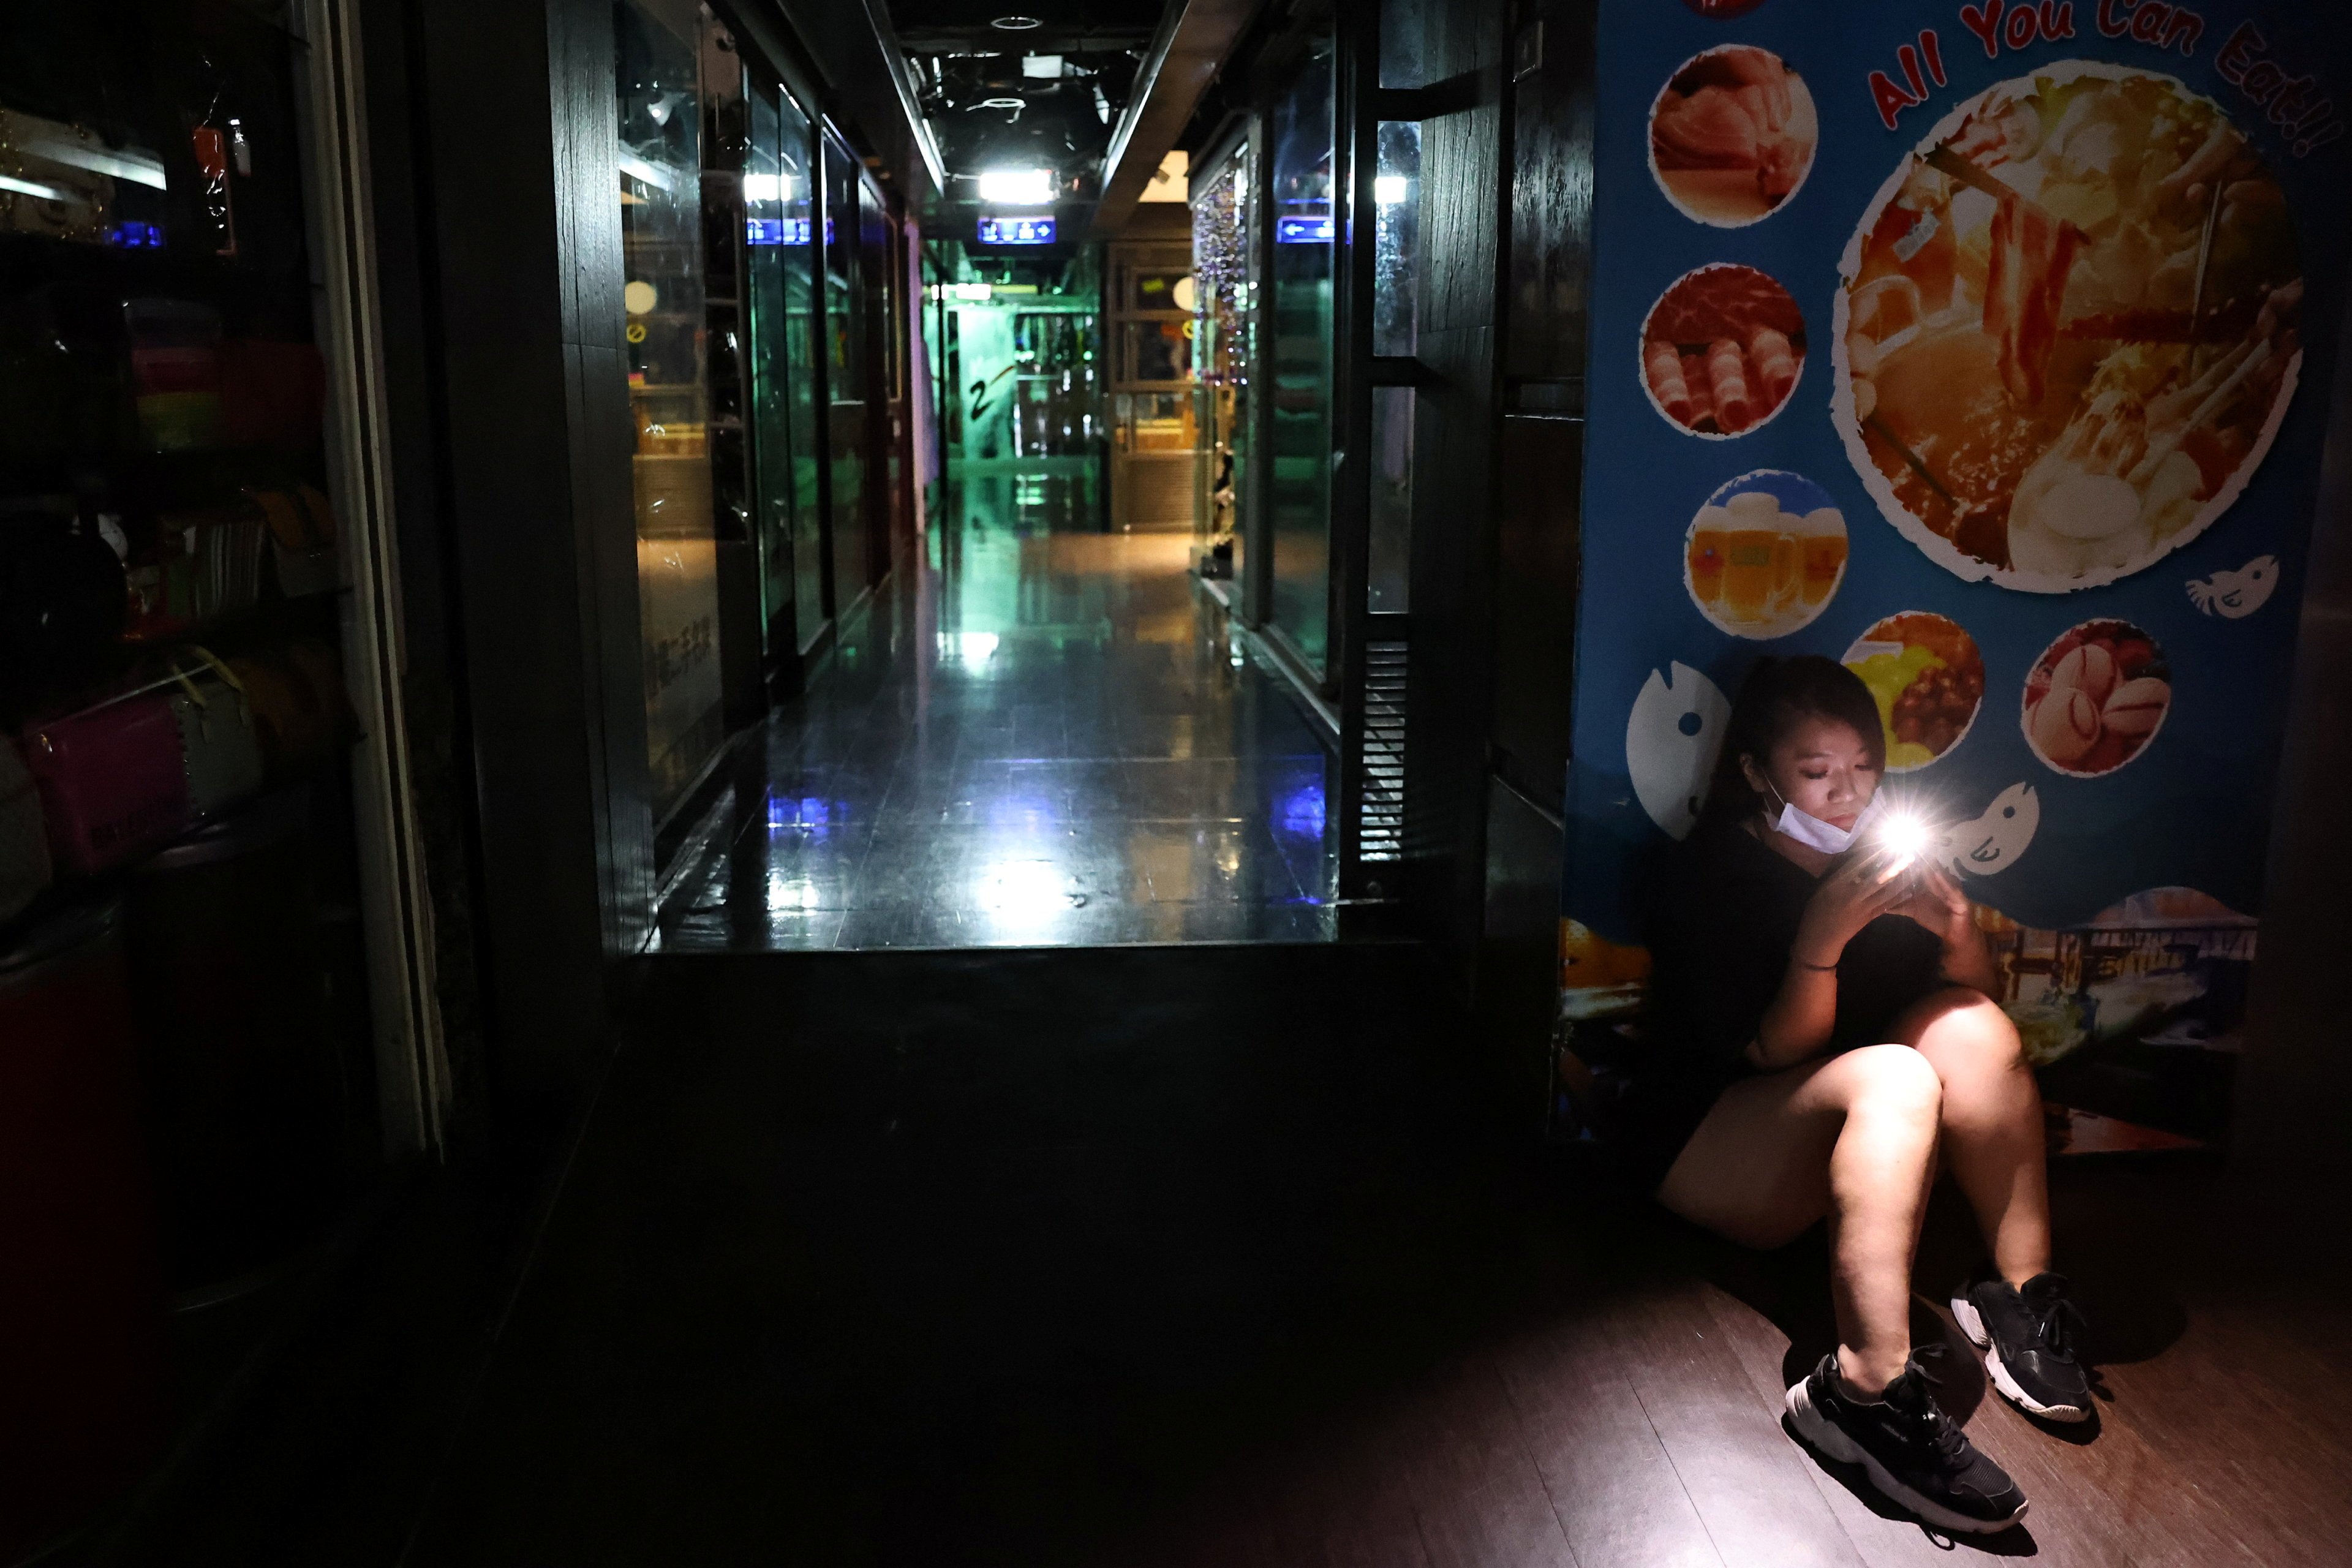 A woman uses her phone while experiencing a blackout due to an outage at a power plant, in Taipei